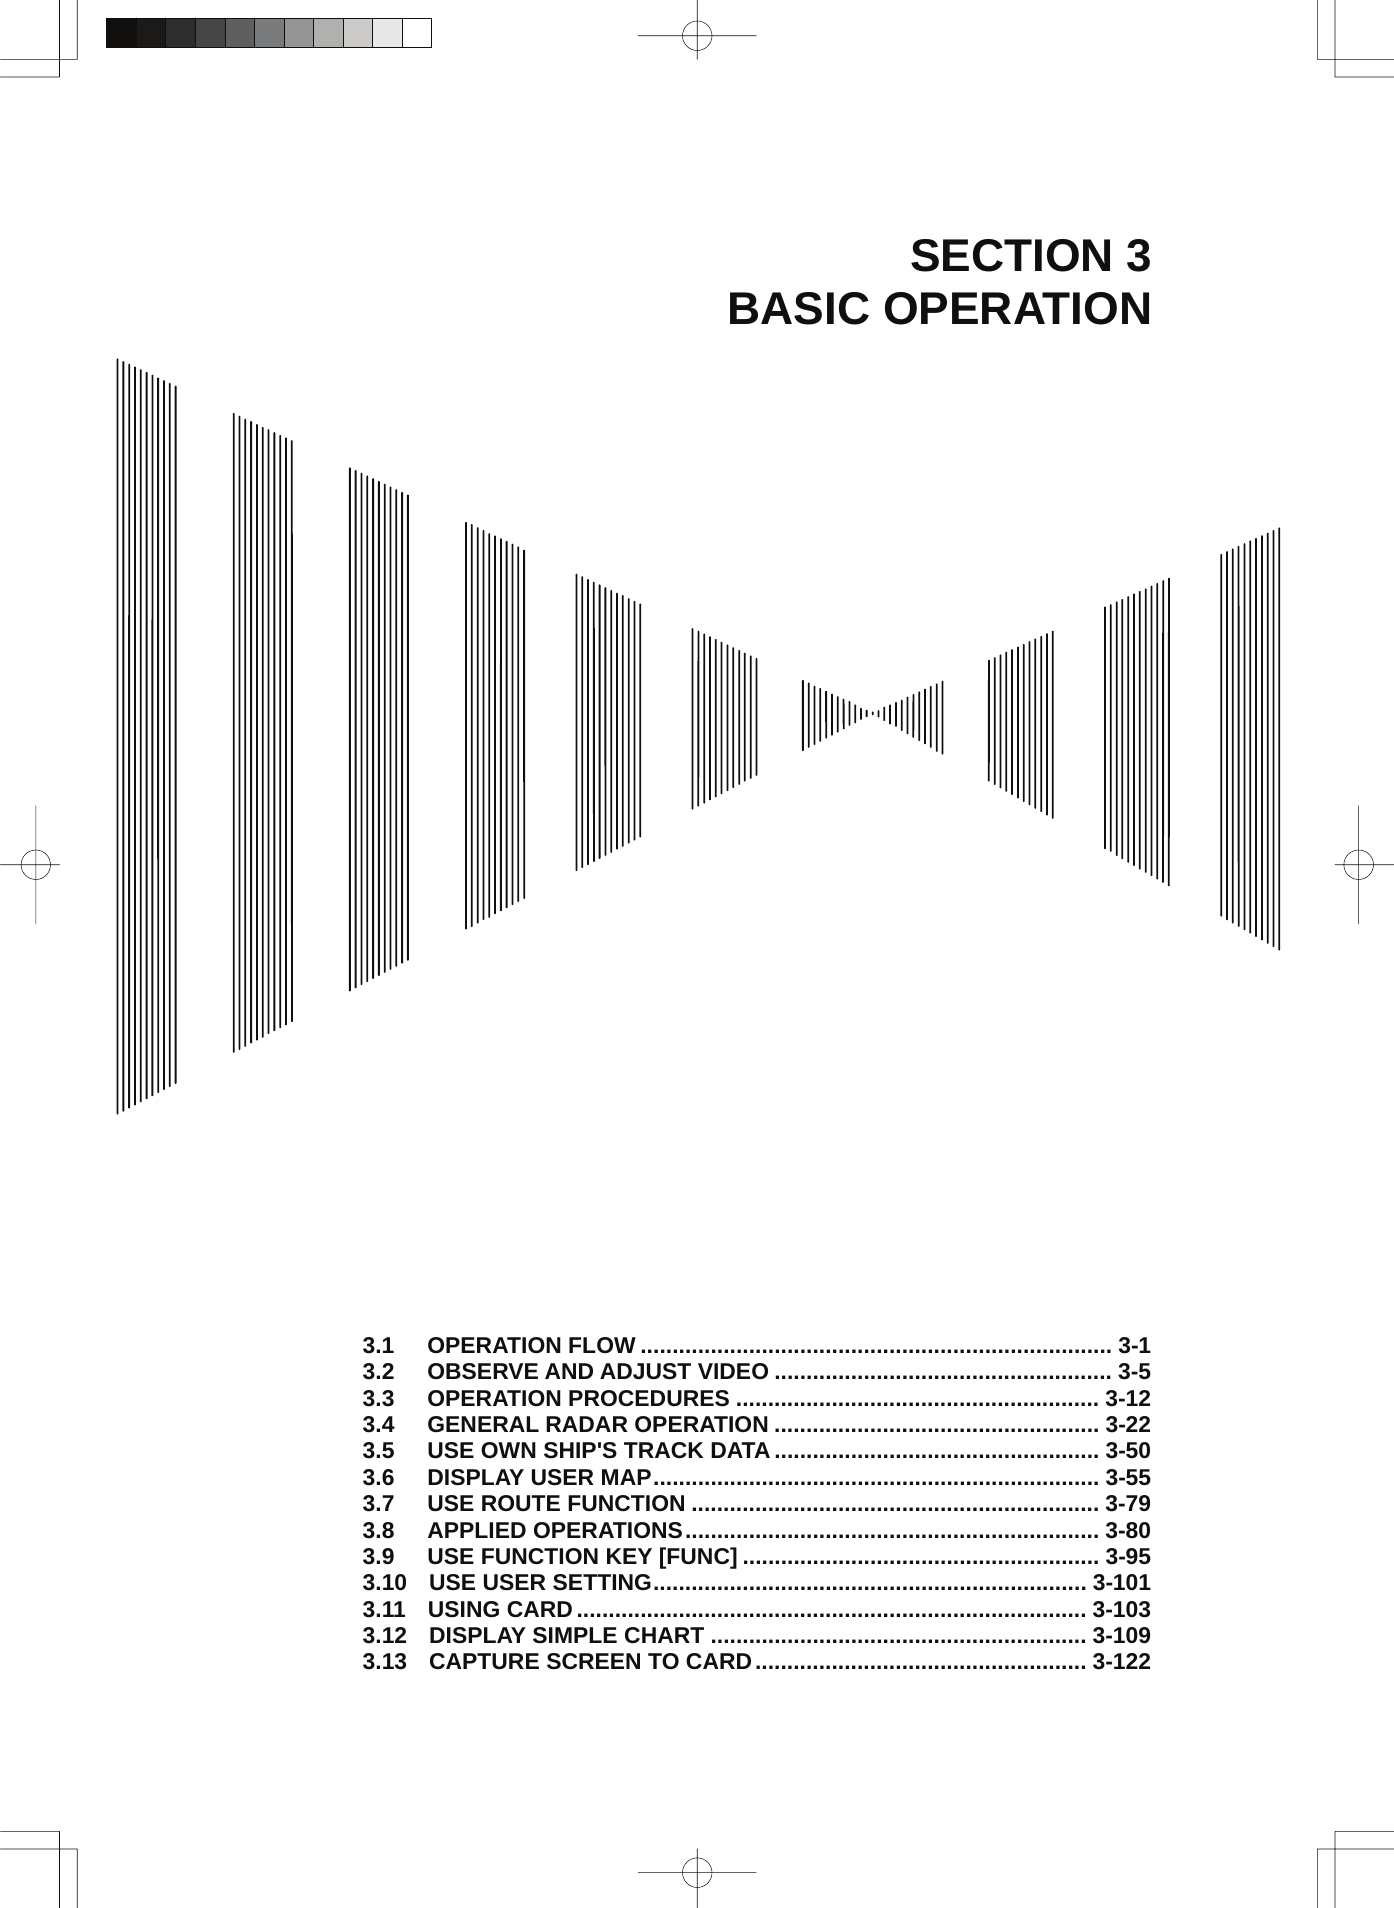  SECTION 3 BASIC OPERATION                                     3.1  OPERATION FLOW .......................................................................... 3-1 3.2  OBSERVE AND ADJUST VIDEO ..................................................... 3-5 3.3  OPERATION PROCEDURES ......................................................... 3-12 3.4  GENERAL RADAR OPERATION ................................................... 3-22 3.5  USE OWN SHIP&apos;S TRACK DATA ................................................... 3-50 3.6  DISPLAY USER MAP...................................................................... 3-55 3.7  USE ROUTE FUNCTION ................................................................ 3-79 3.8  APPLIED OPERATIONS................................................................. 3-80 3.9  USE FUNCTION KEY [FUNC] ........................................................ 3-95 3.10 USE USER SETTING.................................................................... 3-101 3.11 USING CARD................................................................................ 3-103 3.12 DISPLAY SIMPLE CHART ........................................................... 3-109 3.13 CAPTURE SCREEN TO CARD.................................................... 3-122 